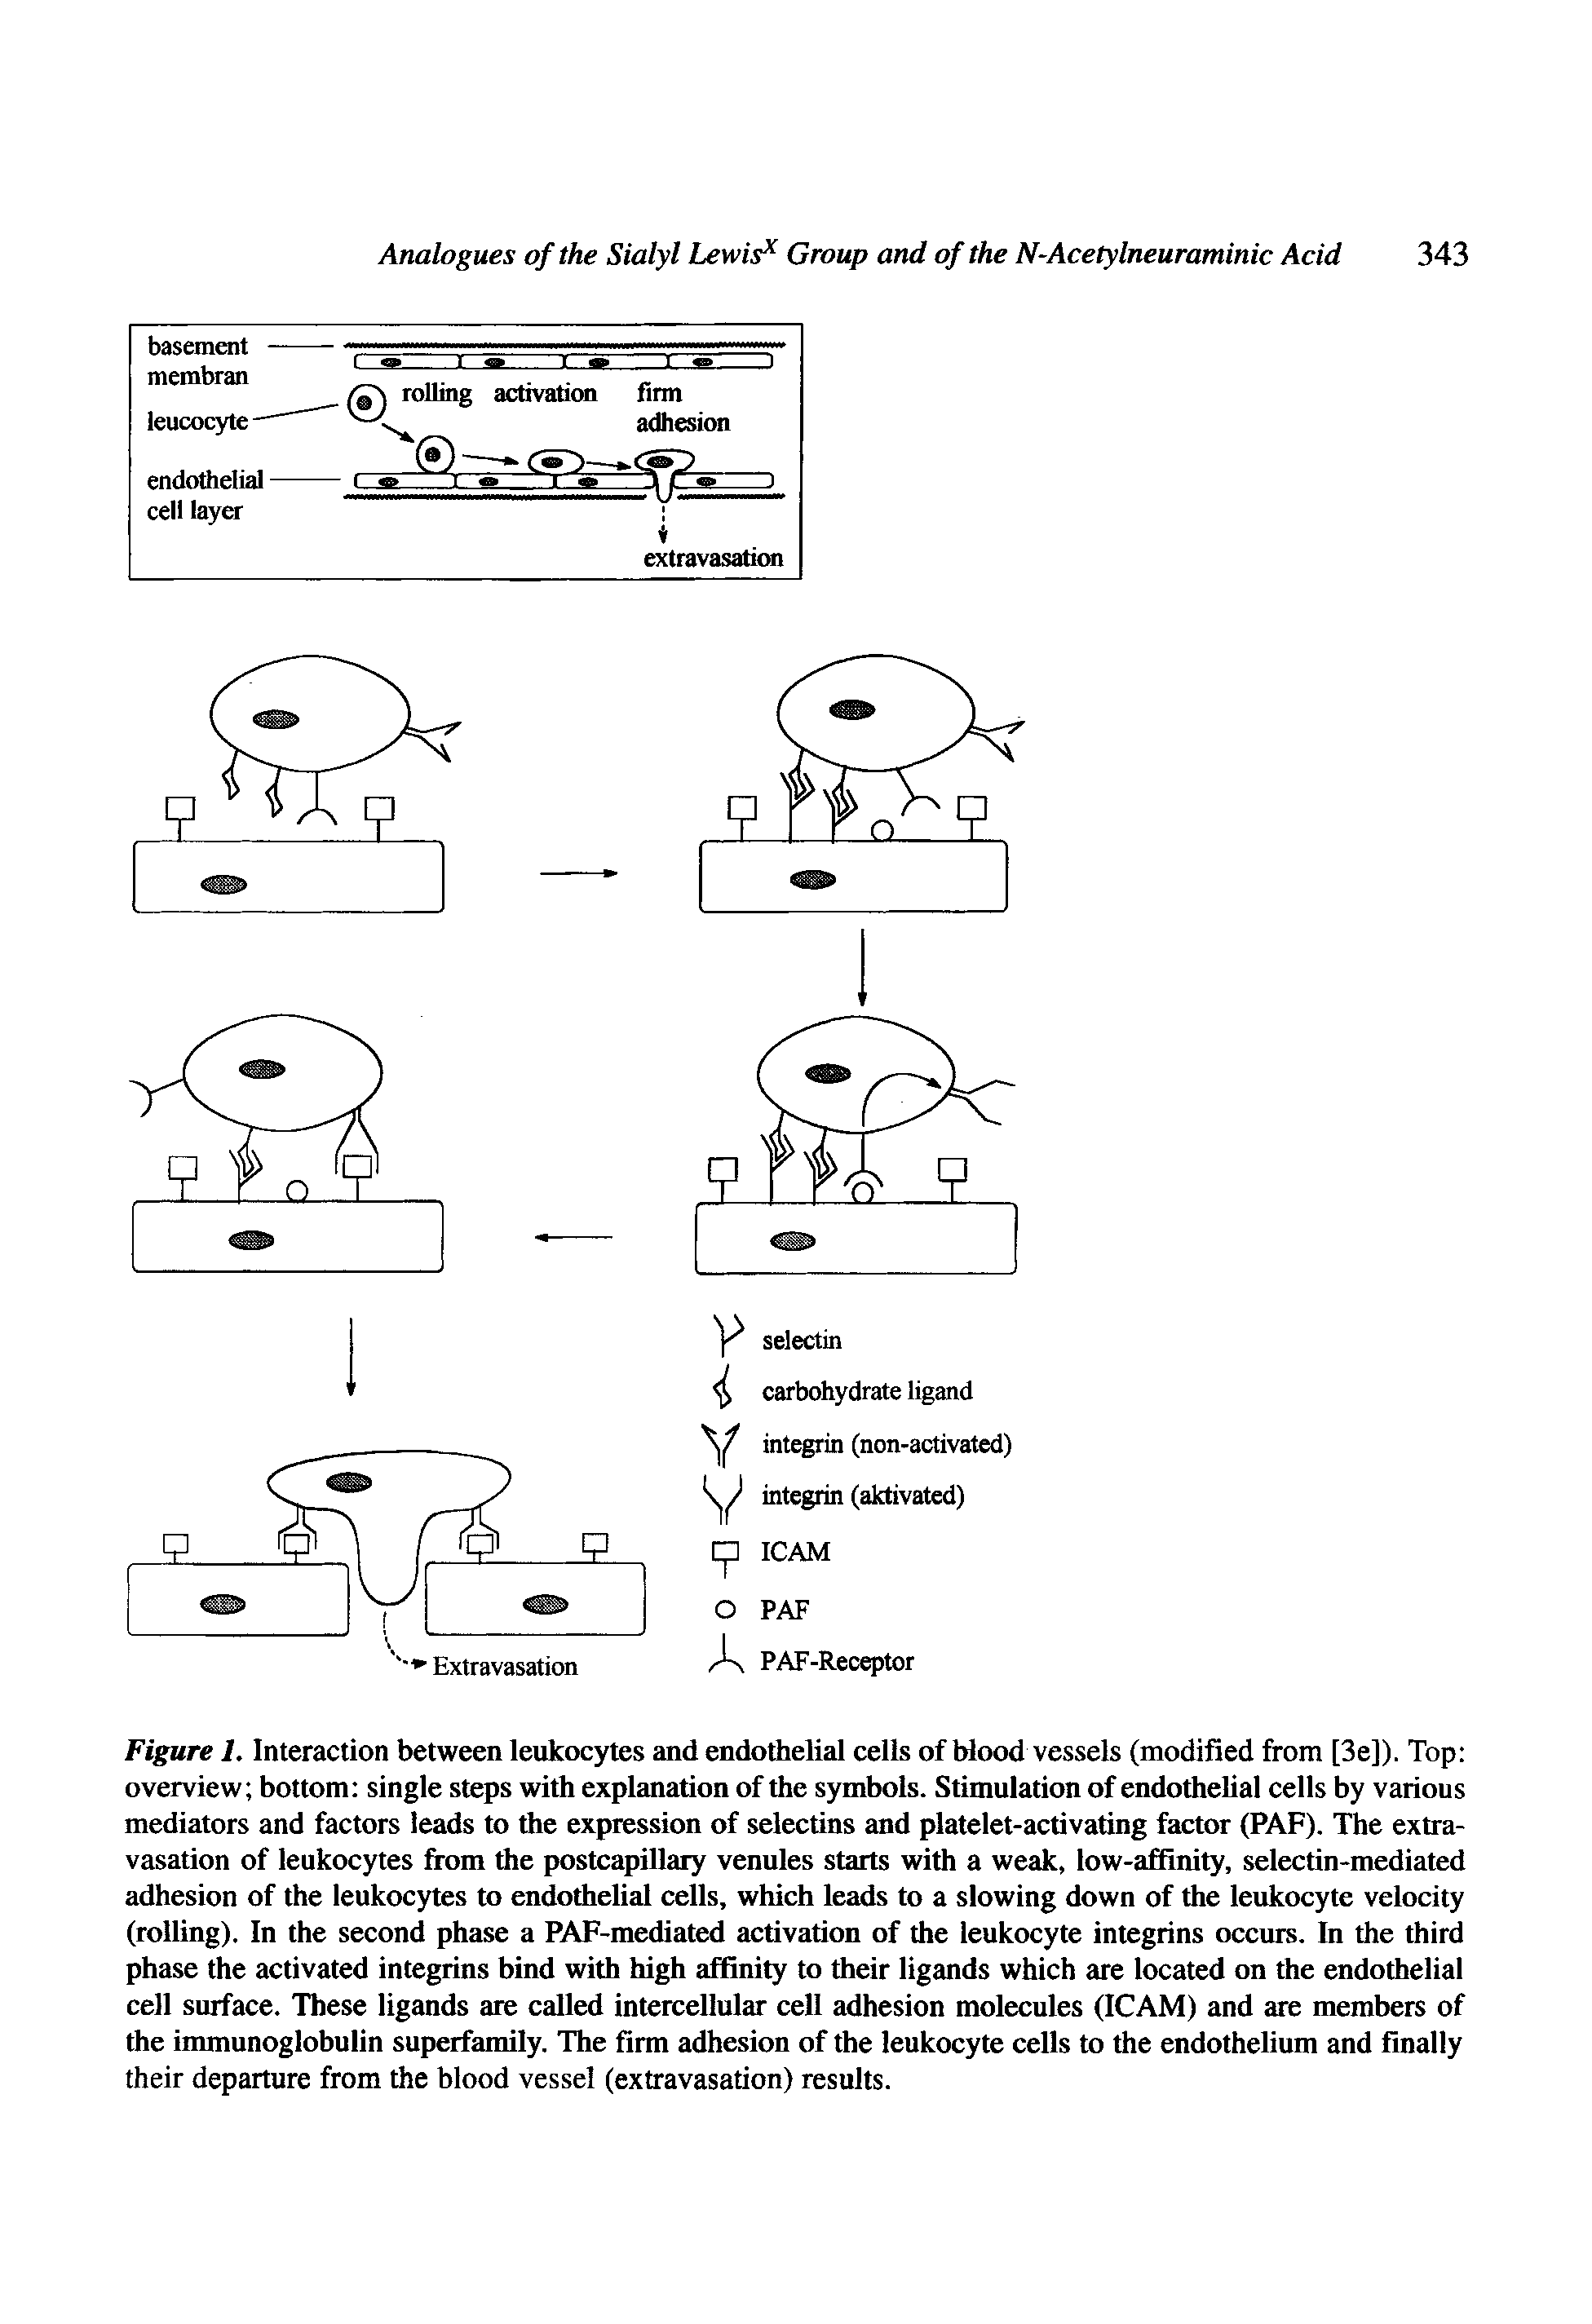 Figure 1. Interaction between leukocytes and endothelial cells of Mood vessels (modified from [3e]). Top overview bottom single steps with explanation of the symbols. Stimulation of endothelial cells by various mediators and factors leads to the expression of selectins and platelet-activating factor (PAF). The extravasation of leukocytes from the postcapillary venules starts with a weak, low-affinity, selectin-mediated adhesion of the leukocytes to endothelial cells, which leads to a slowing down of the leukocyte velocity (rolling). In the second phase a PAF-mediated activation of the leukocyte integrins occurs. In the third phase the activated integrins bind with high affinity to their ligands which are located on the endothelial cell surface. These ligands are called intercellular cell adhesion molecules (ICAM) and are members of the immunoglobulin superfamily. The firm adhesion of the leukocyte cells to the endothelium and finally their departure from the blood vessel (extravasation) results.